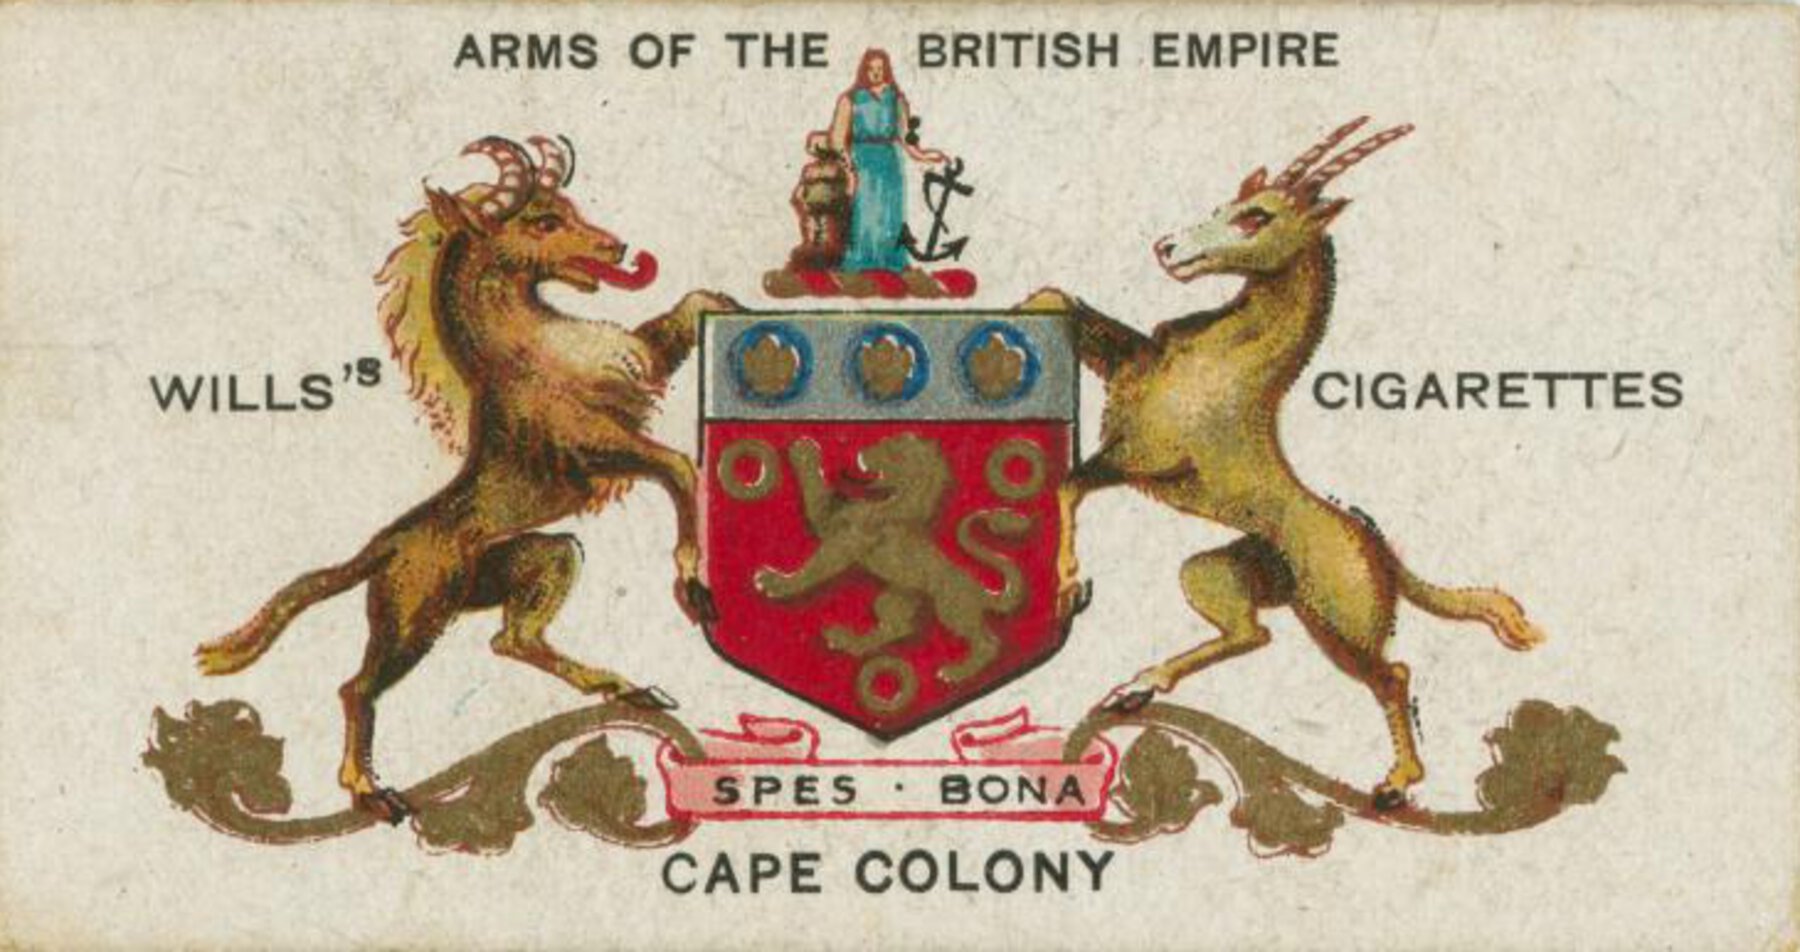 “Arms of the British Empire”: Crest with lions and crowns, horned deer on either side, and woman with anchor above.